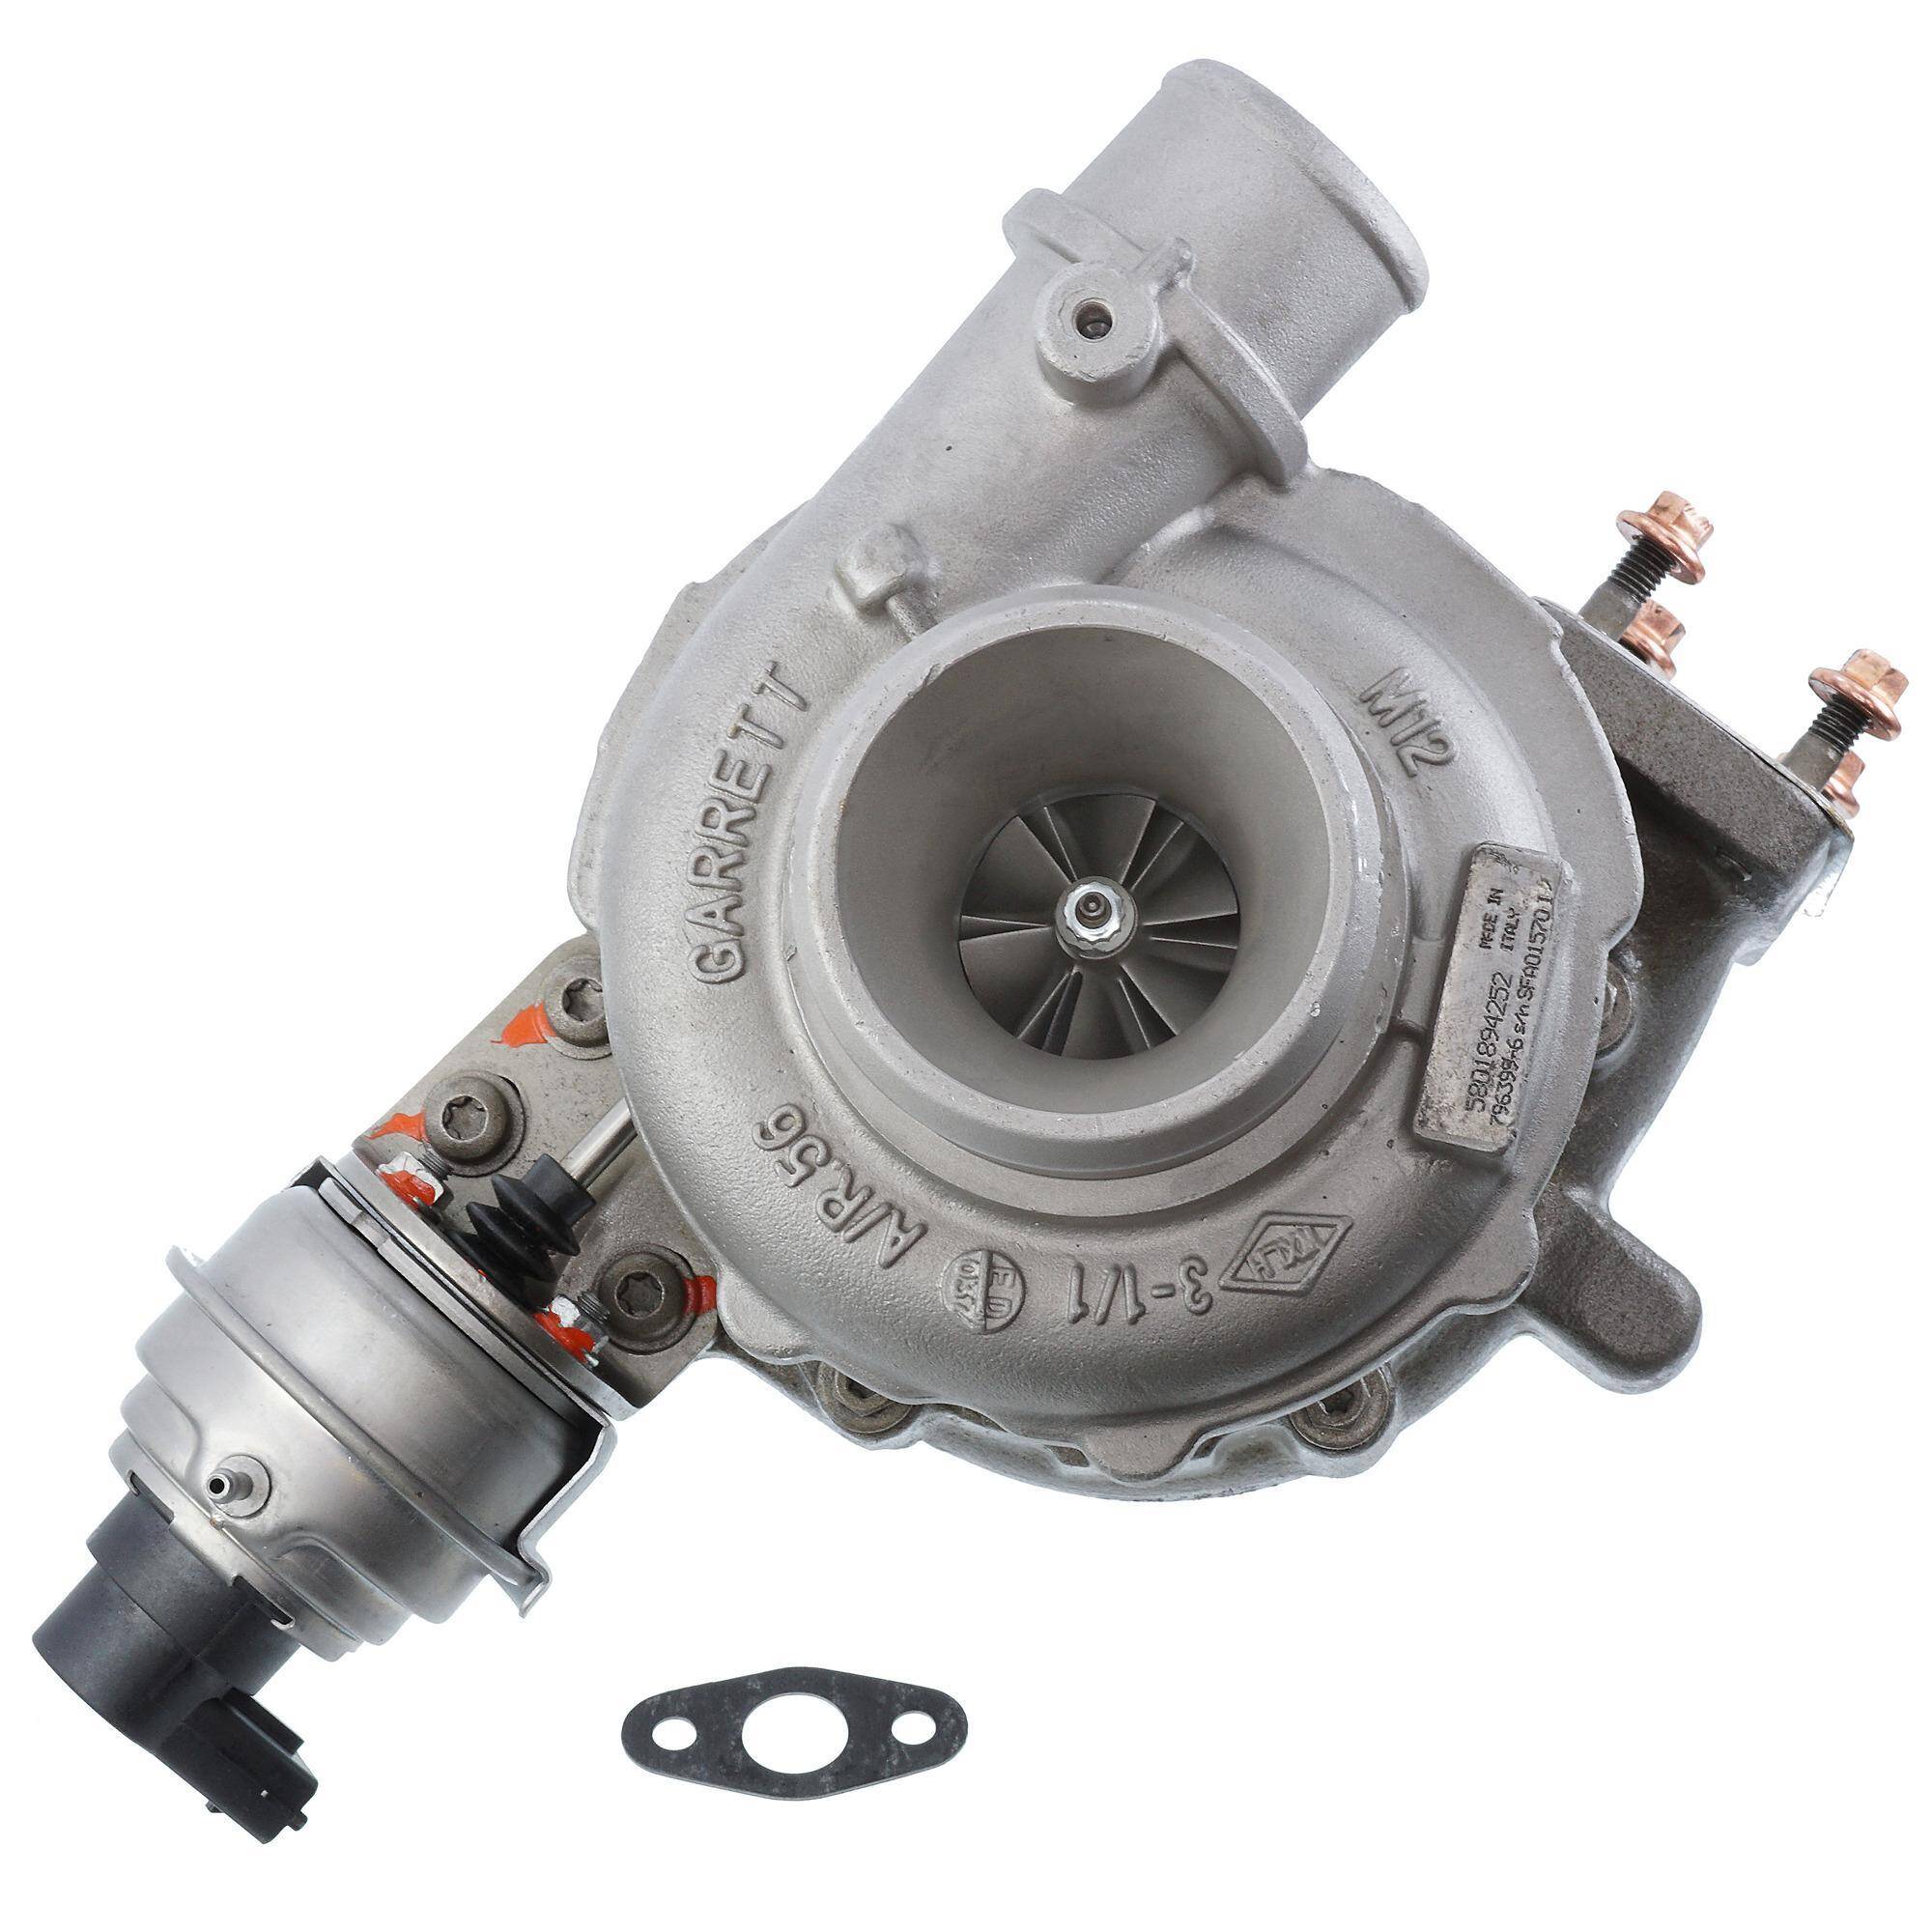 TURBOCHARGER TURBO REMANUFACTURED 796399-0004 5 DAILY 504364177 796399-0004 IVECO